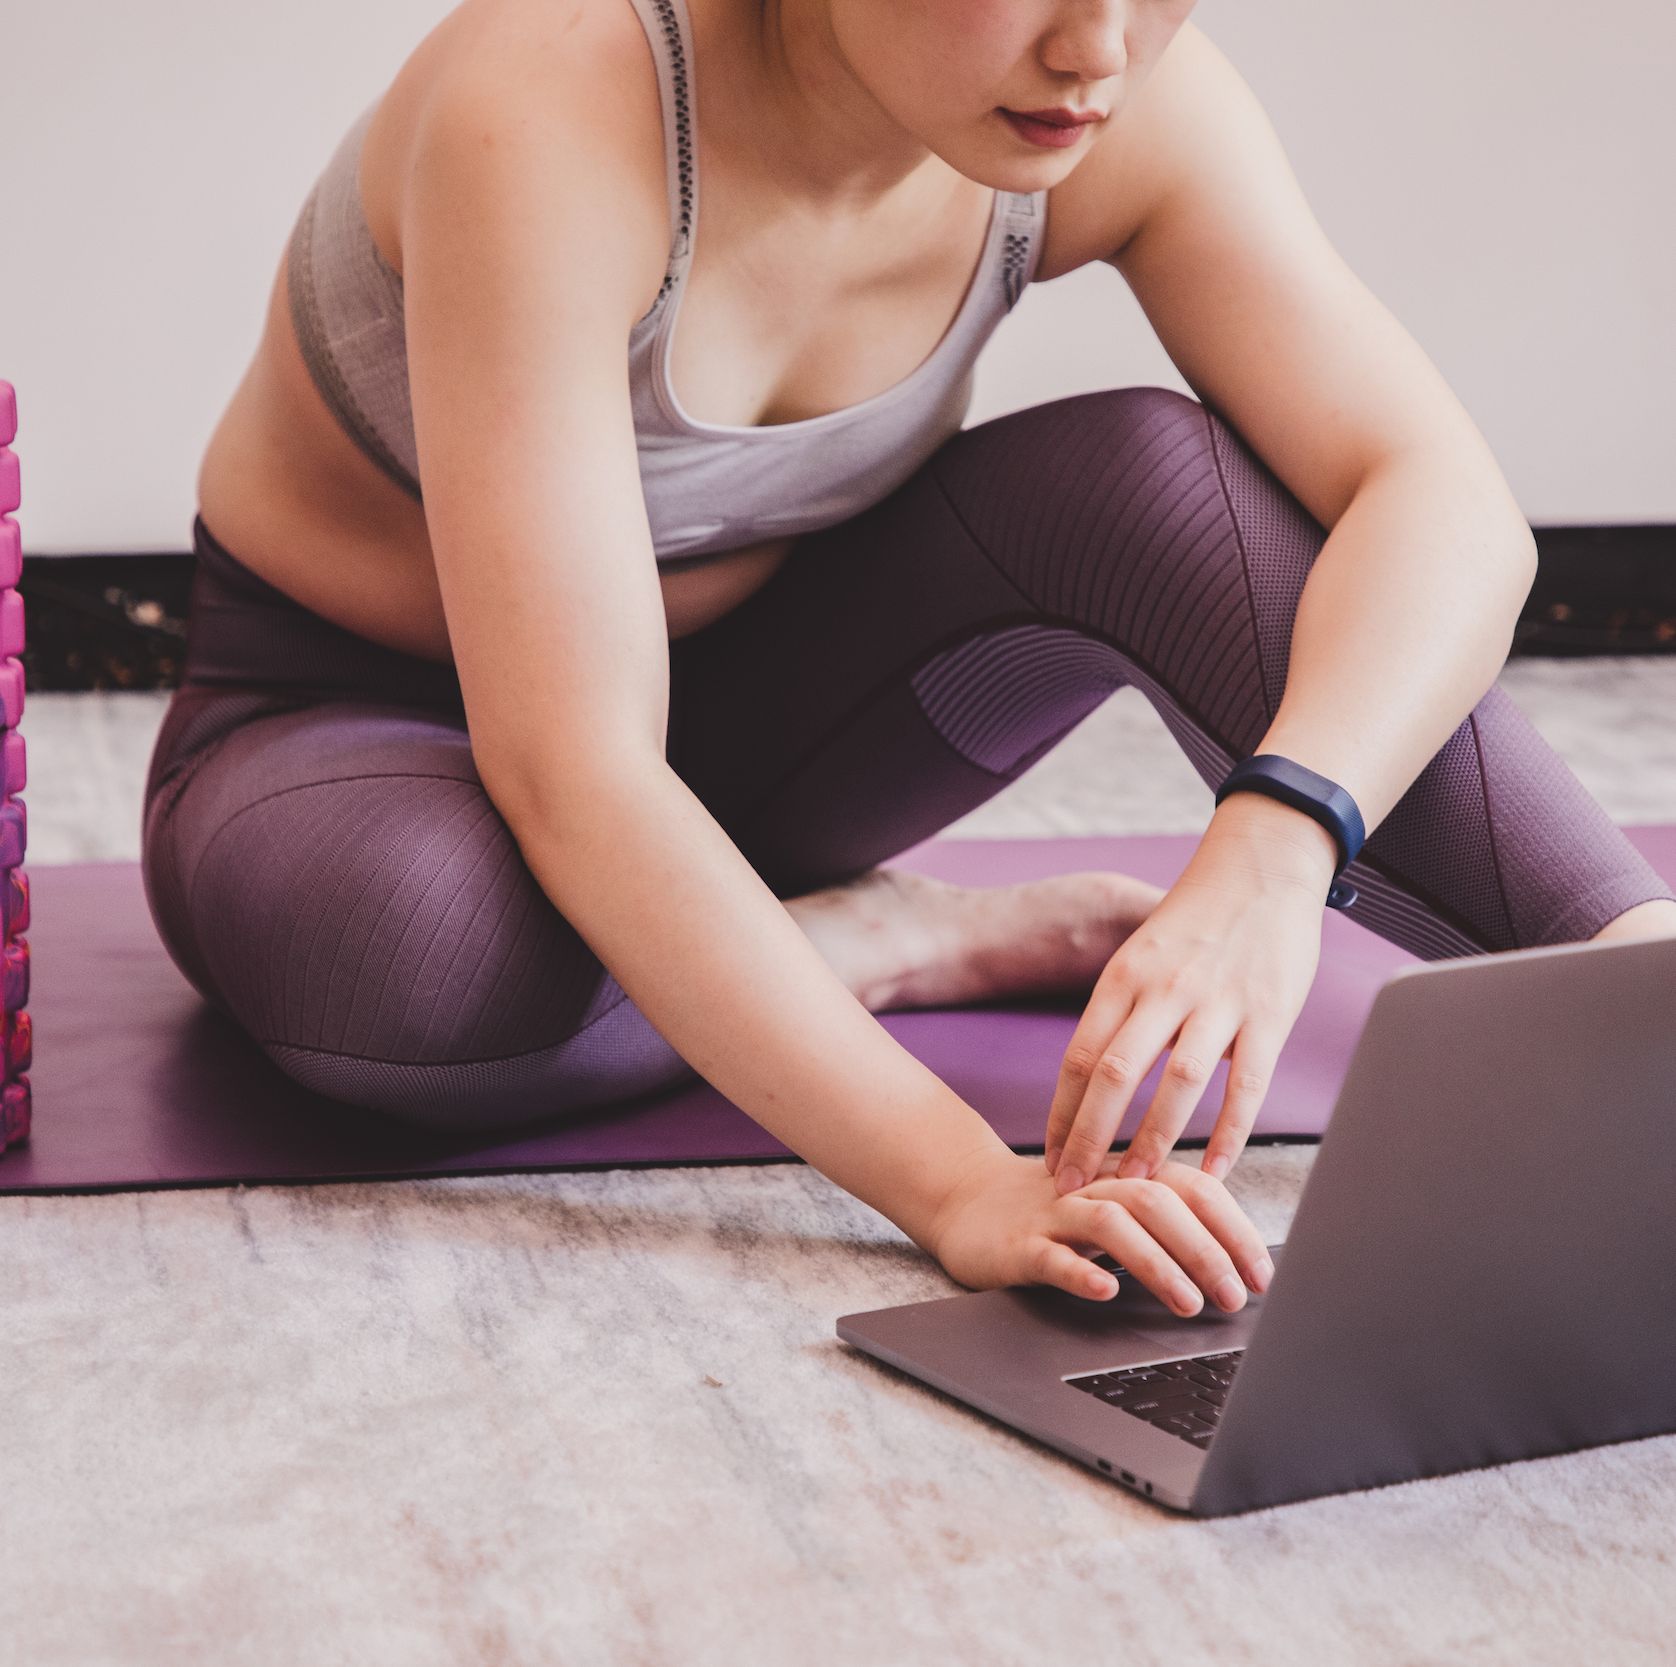 How to Get Hired as an Online Personal Trainer